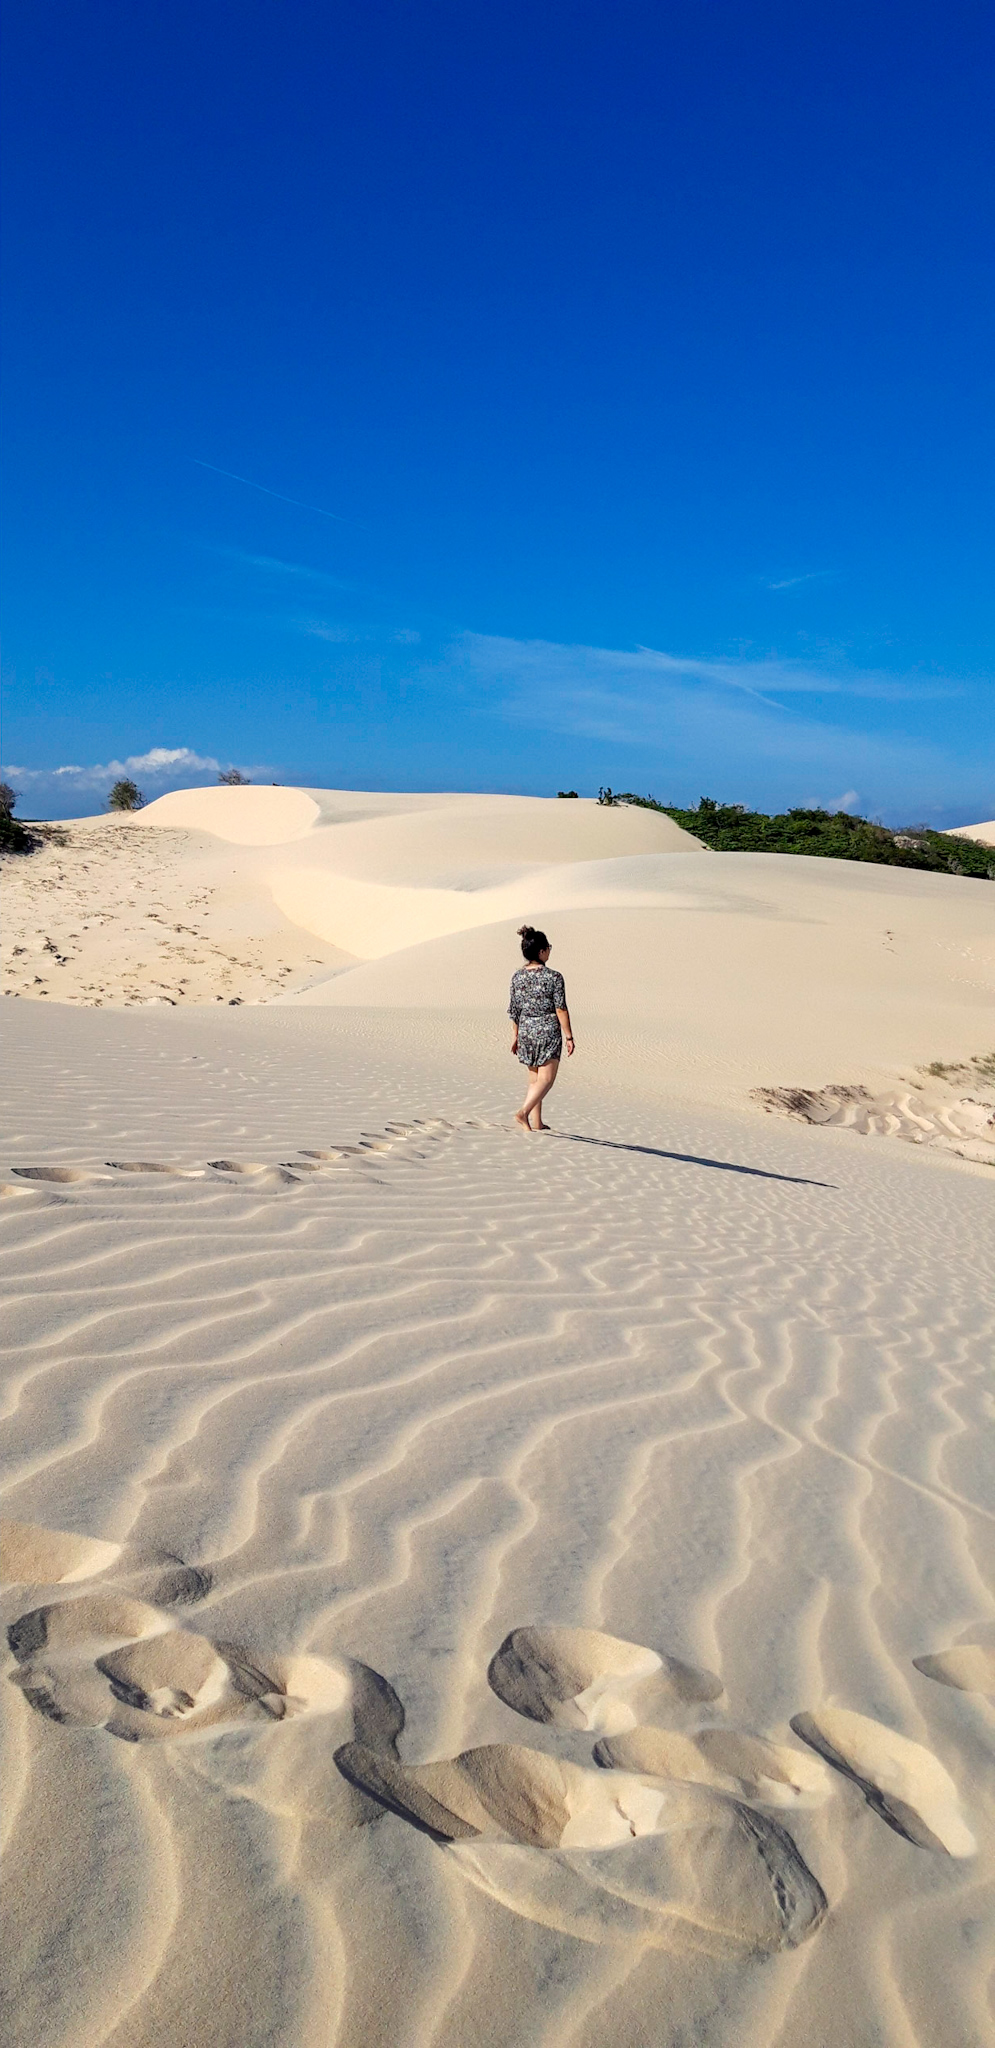 Since my first hitchhiking experience was good, the next day we returned to the road to try our luck again. Our destination: Mui Ne sand dunes.